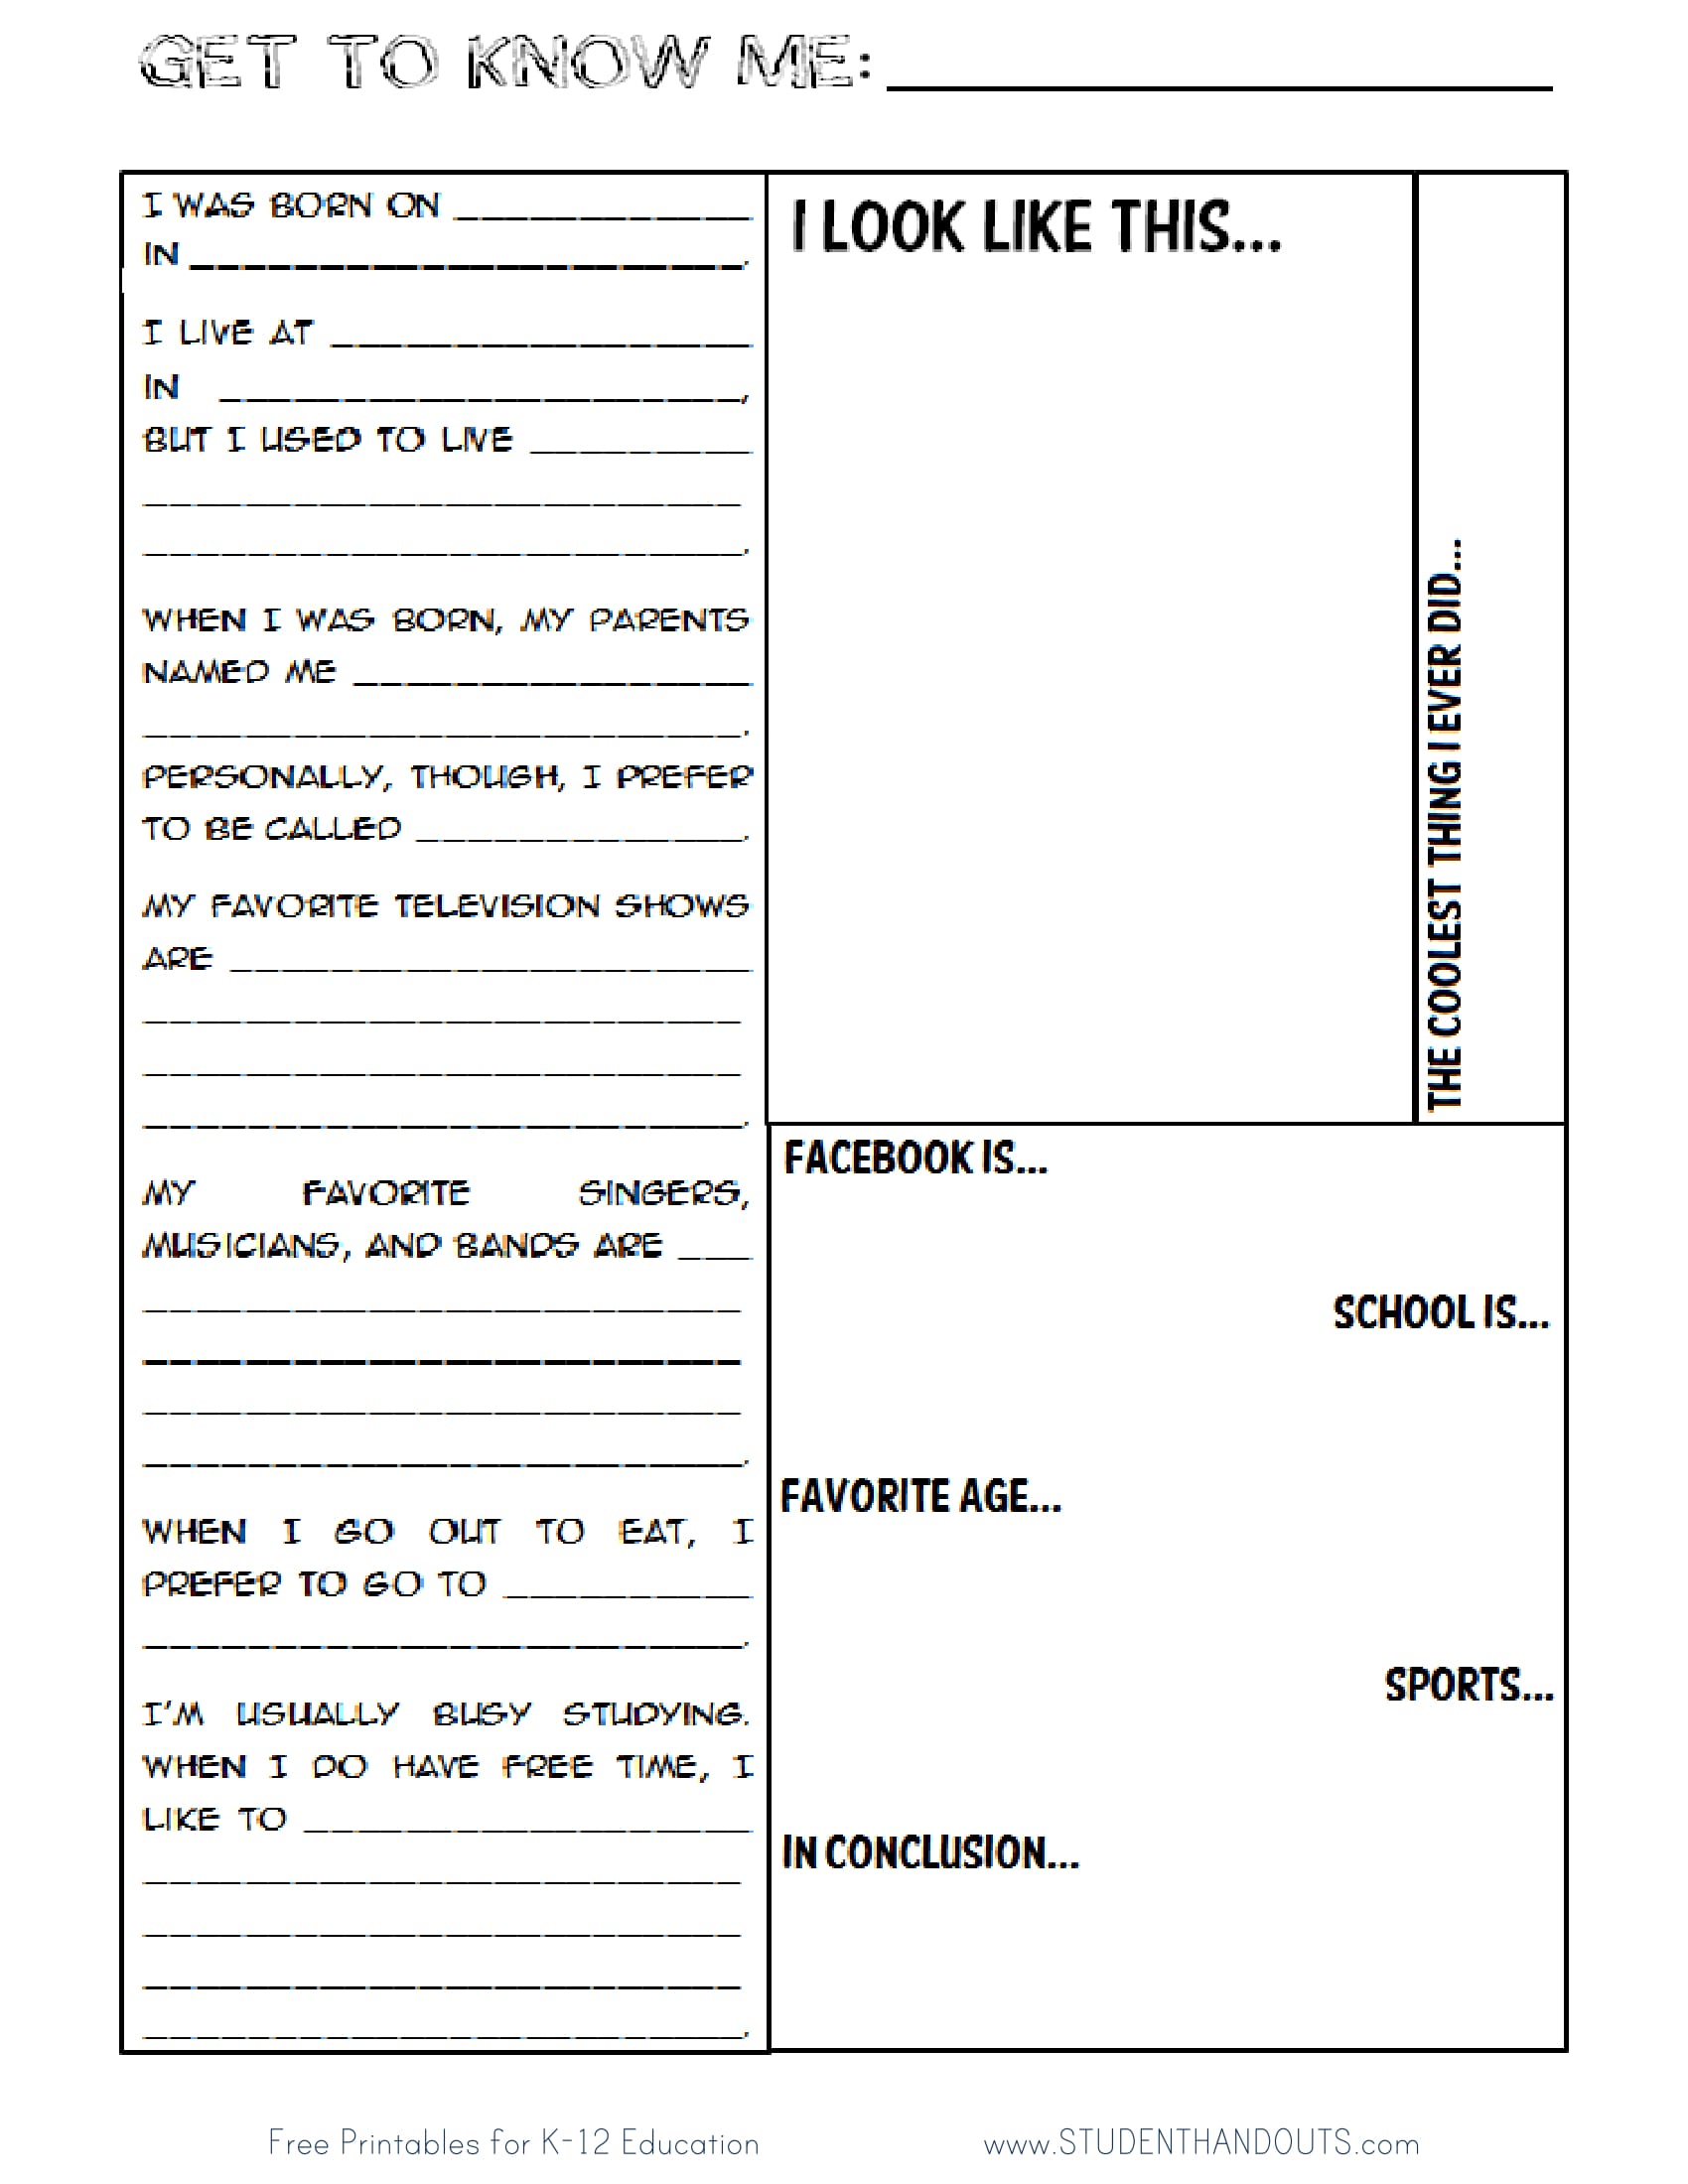 student personal information form 1